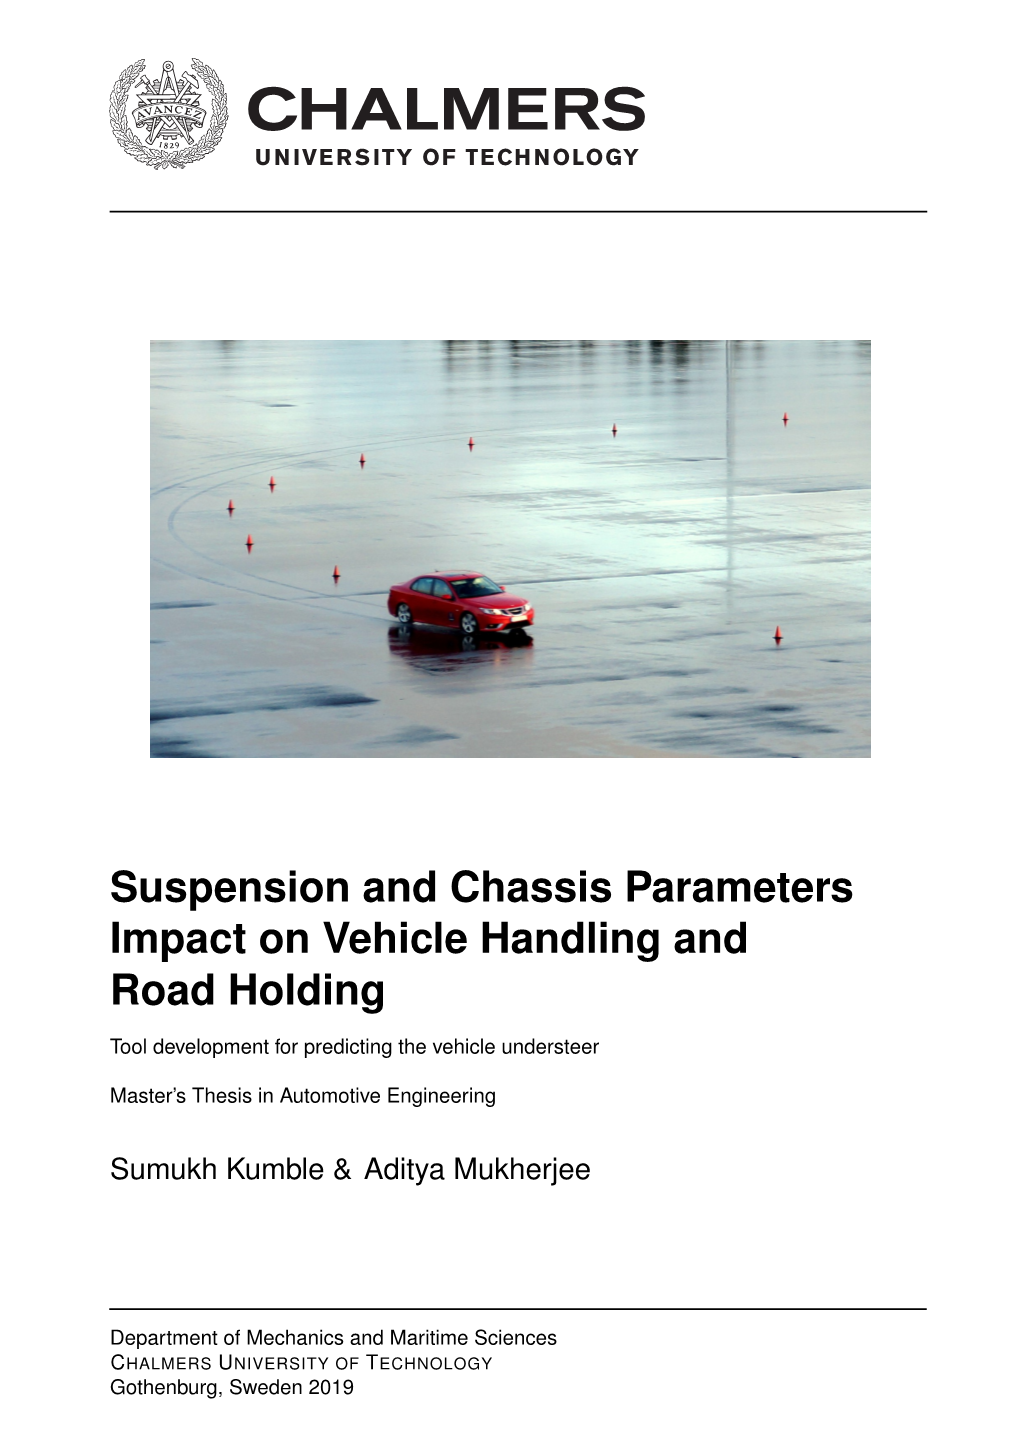 Suspension and Chassis Parameters Impact on Vehicle Handling and Road Holding